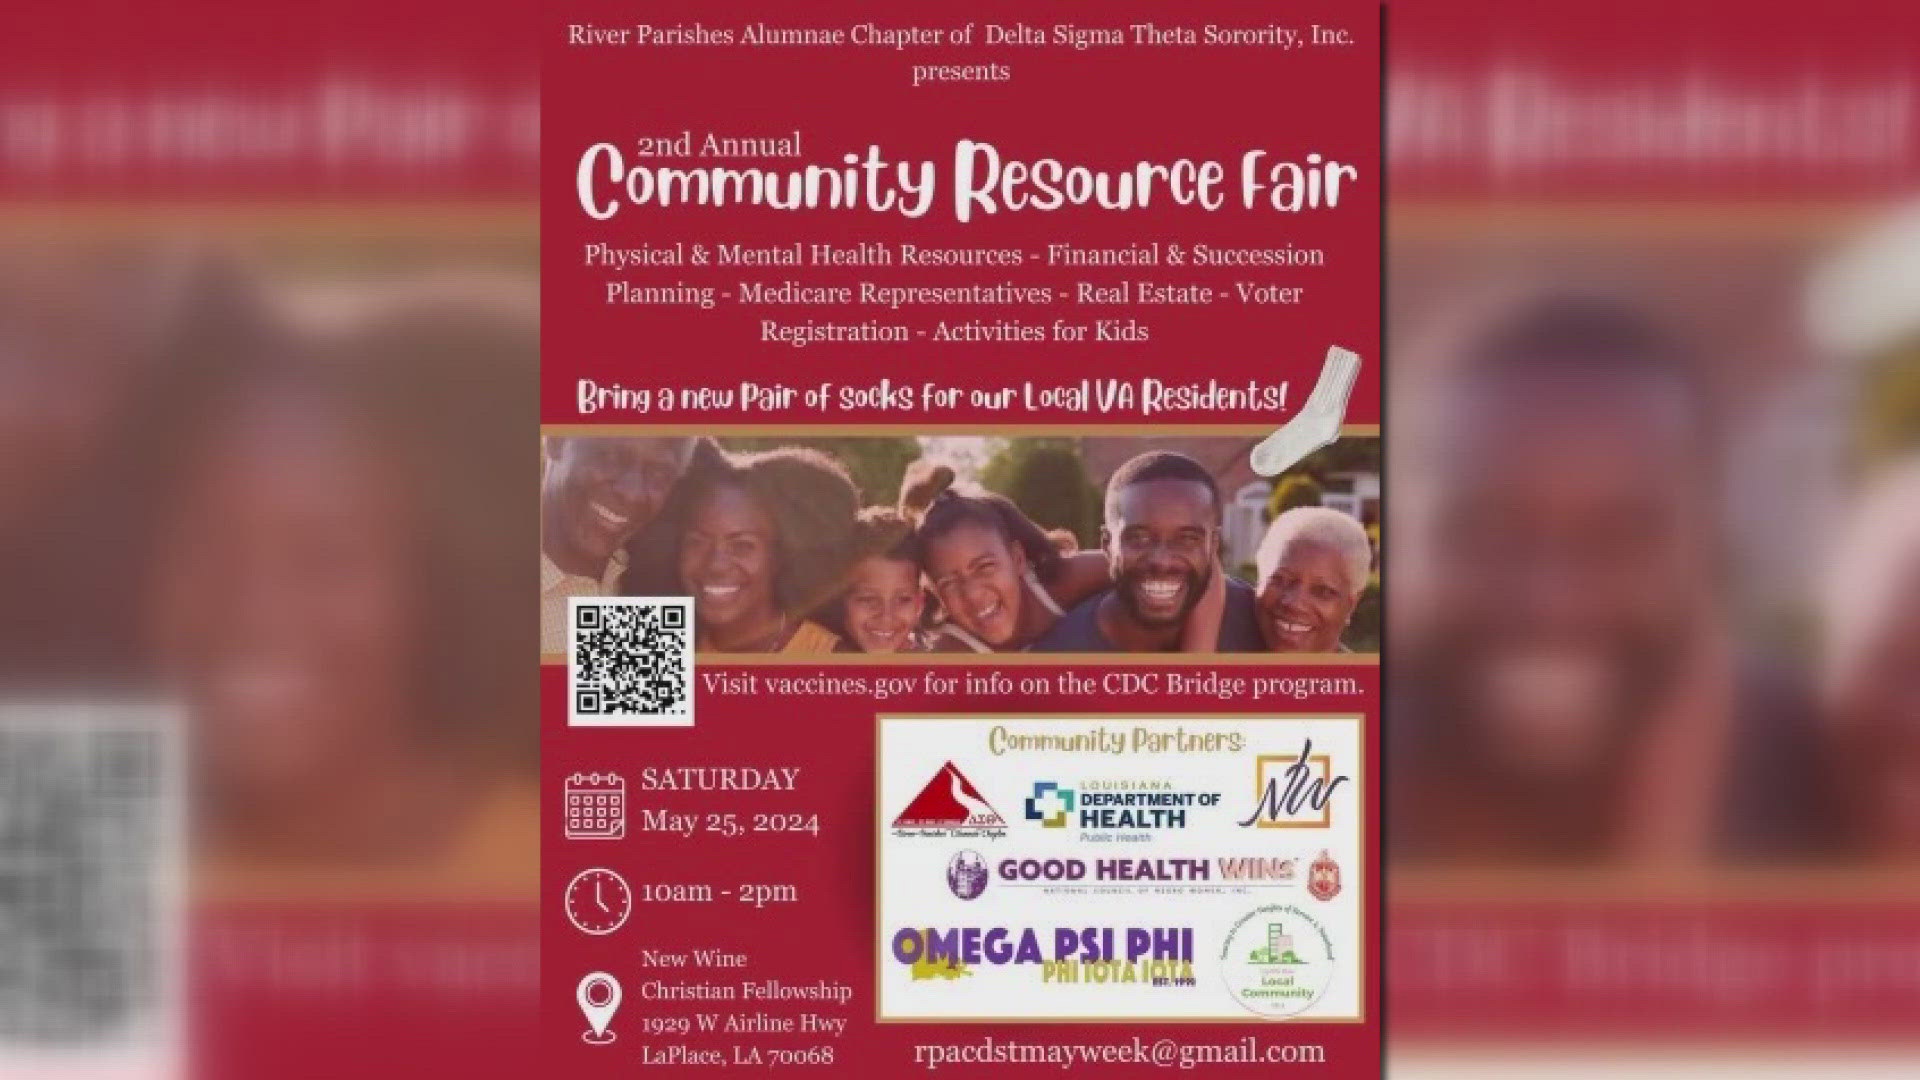 The River Parishes Alumnae Chapter of Delta Sigma Theta Sorority, Inc will host its second annual Community Resources Fair Saturday, May 25 at 10am, 929 West Airline